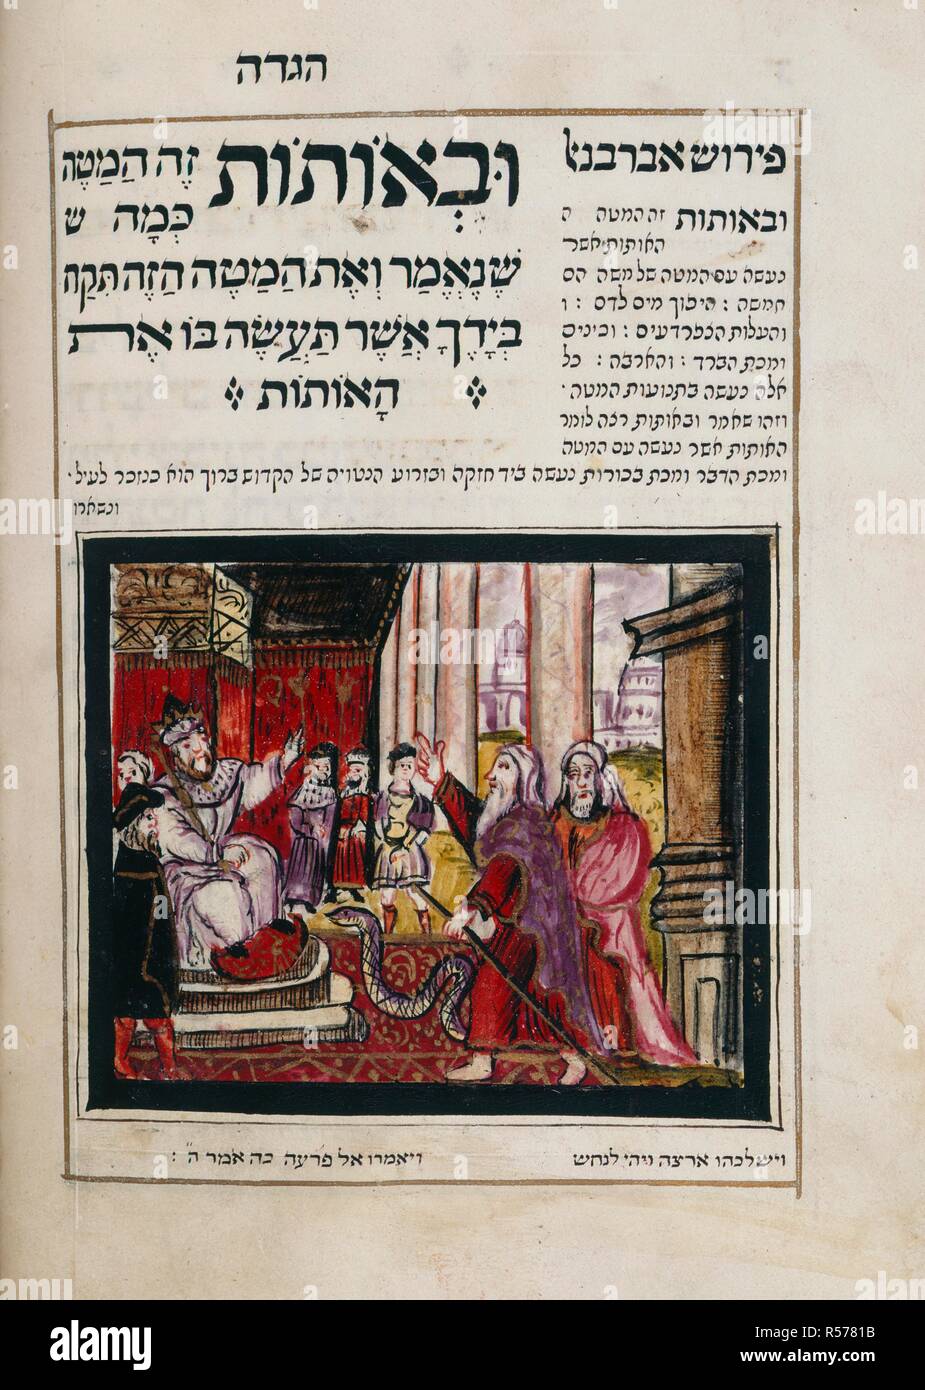 Moses and Aaron at Pharaoh's court. Passover Haggadah. Hamburg and Altona, 1740. Moses and Aaron at Pharaoh's court trying to persuade the latter to free the Israelites .  Image taken from Passover Haggadah .  Originally published/produced in Hamburg and Altona, 1740 . . Source: Add. 18724, f.15v. Language: Hebrew. Author: Jacob ben Judah Leib of Berlin. Stock Photo